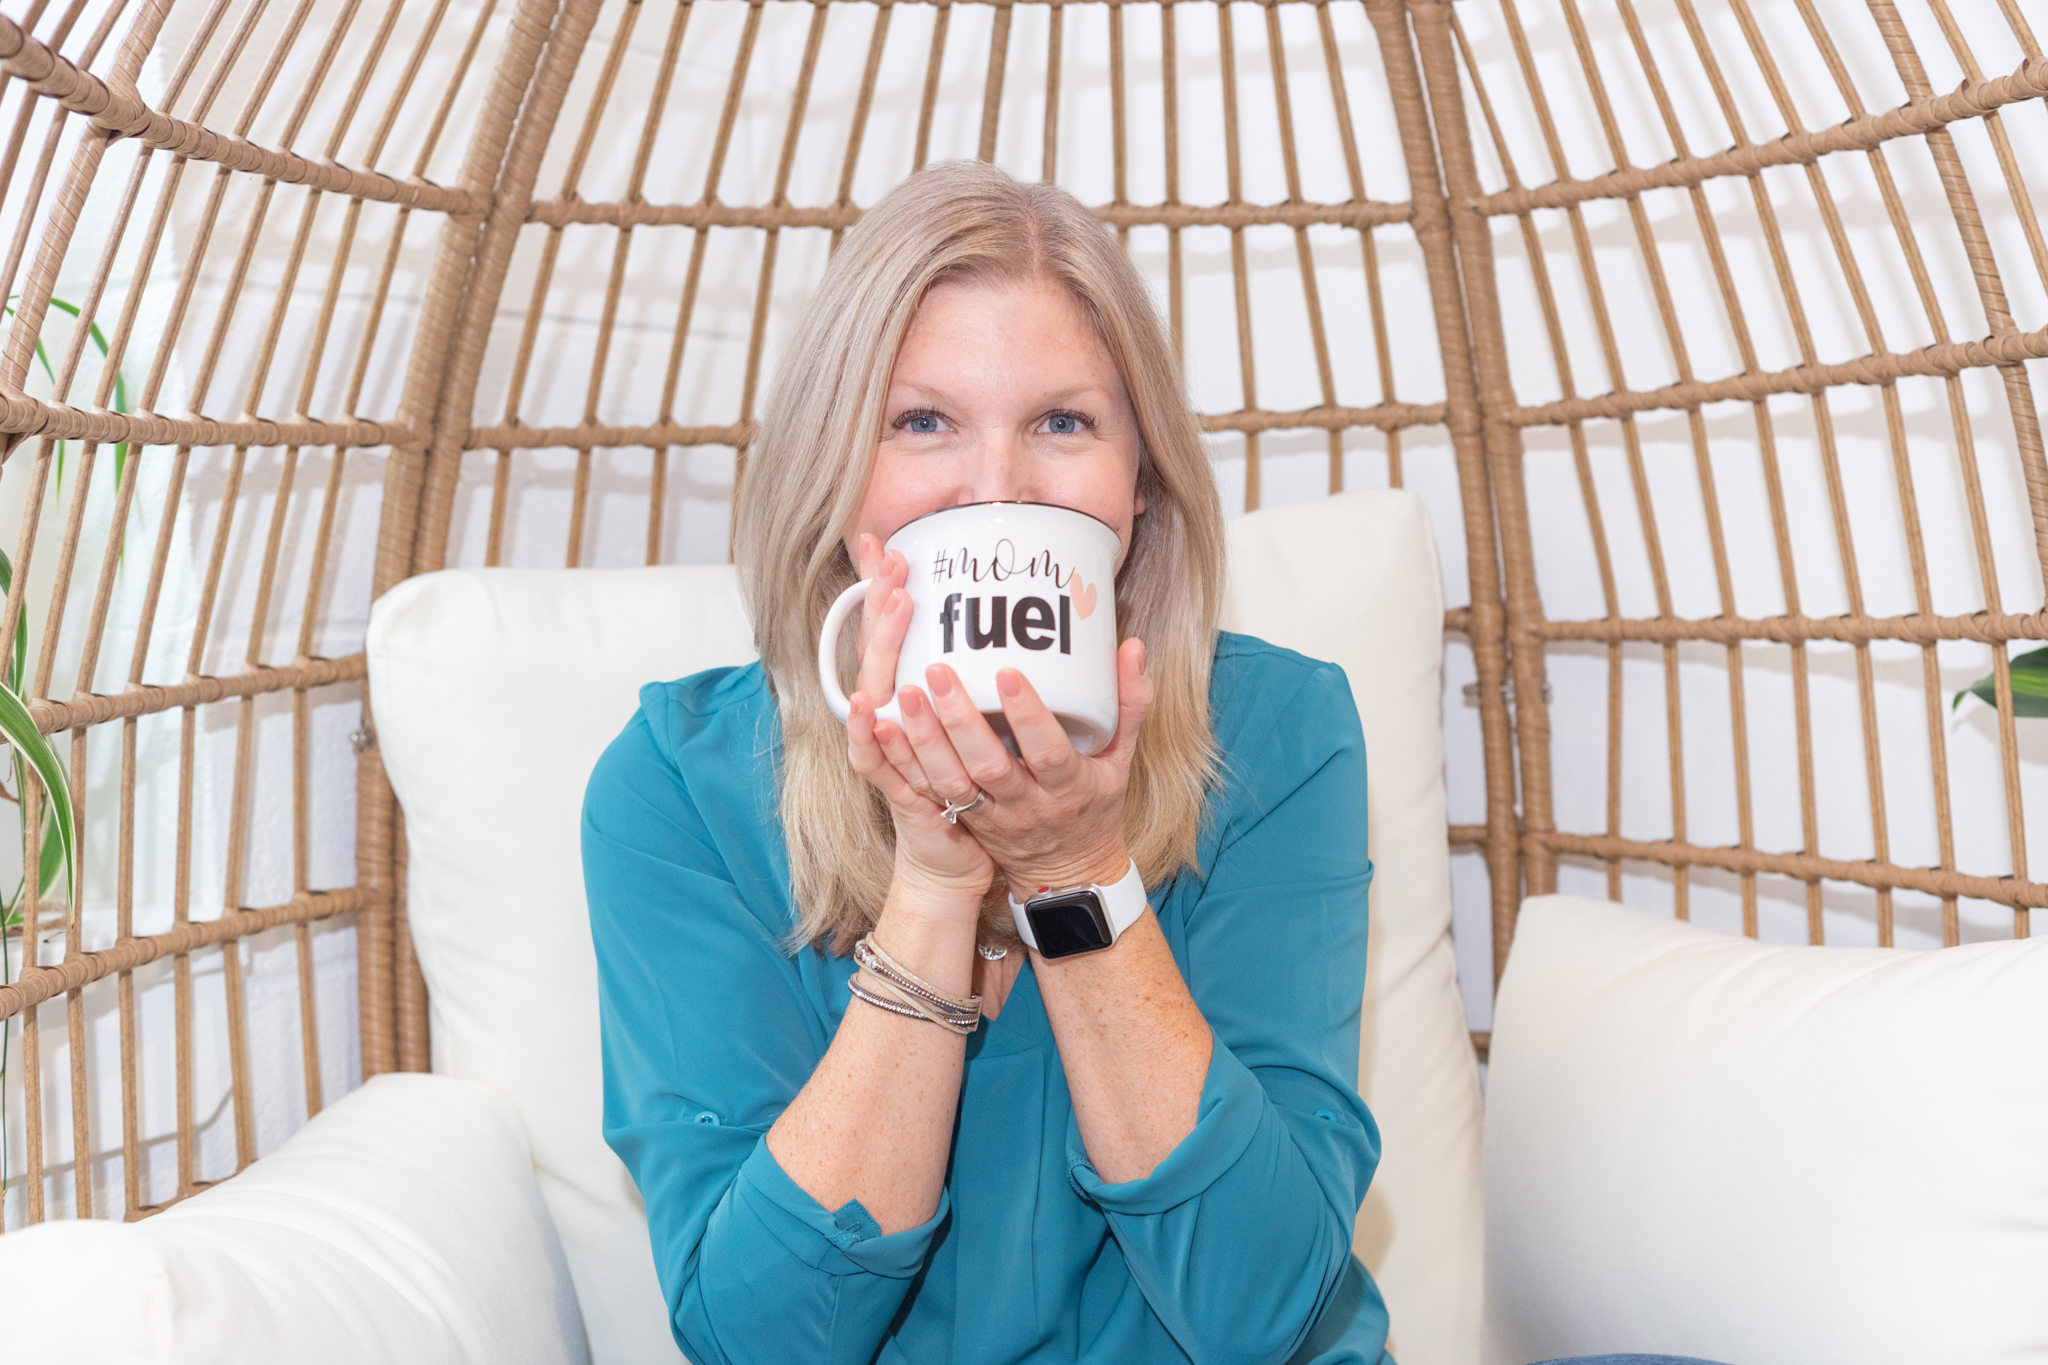 A female business coach sitting in an egg chair and drinking from a mug with "Mom Fuel" text.